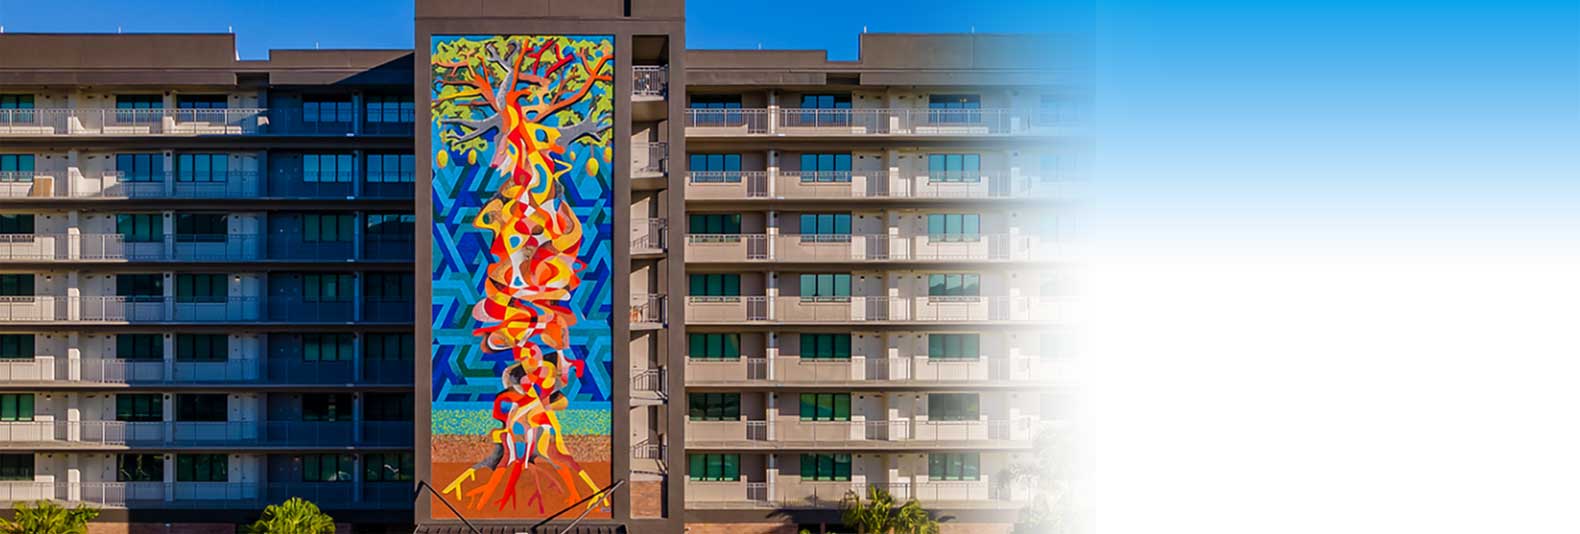 Tampa Housing Authority Aparment Build with mural painting